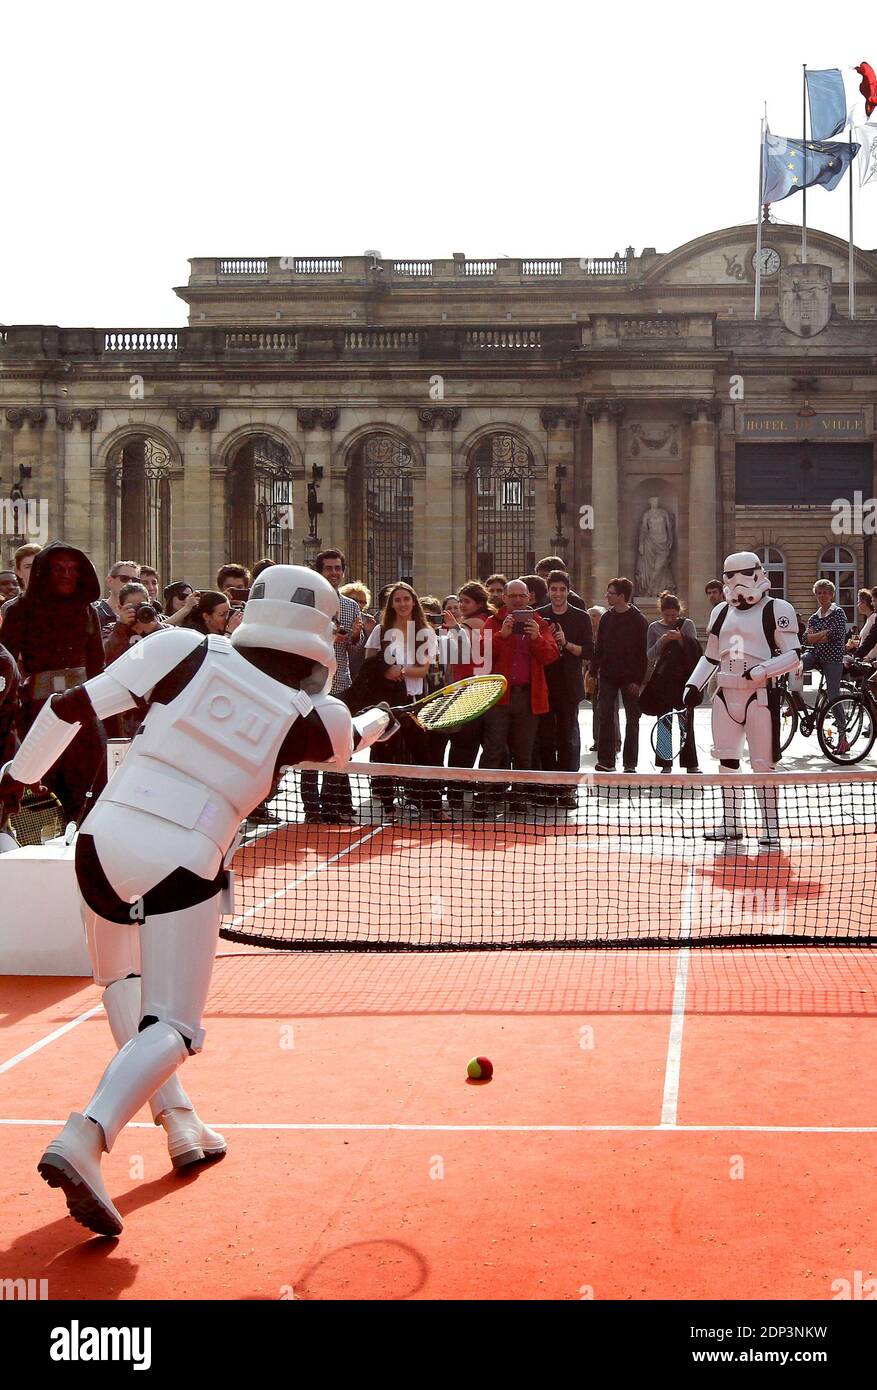 Star Wars' figures play tennis on an ephemeral court as part of 'May the  4th' ('May The Force Be With You') celebration to promote the 2015 BNP  Paribas Primrose tennis tournament to